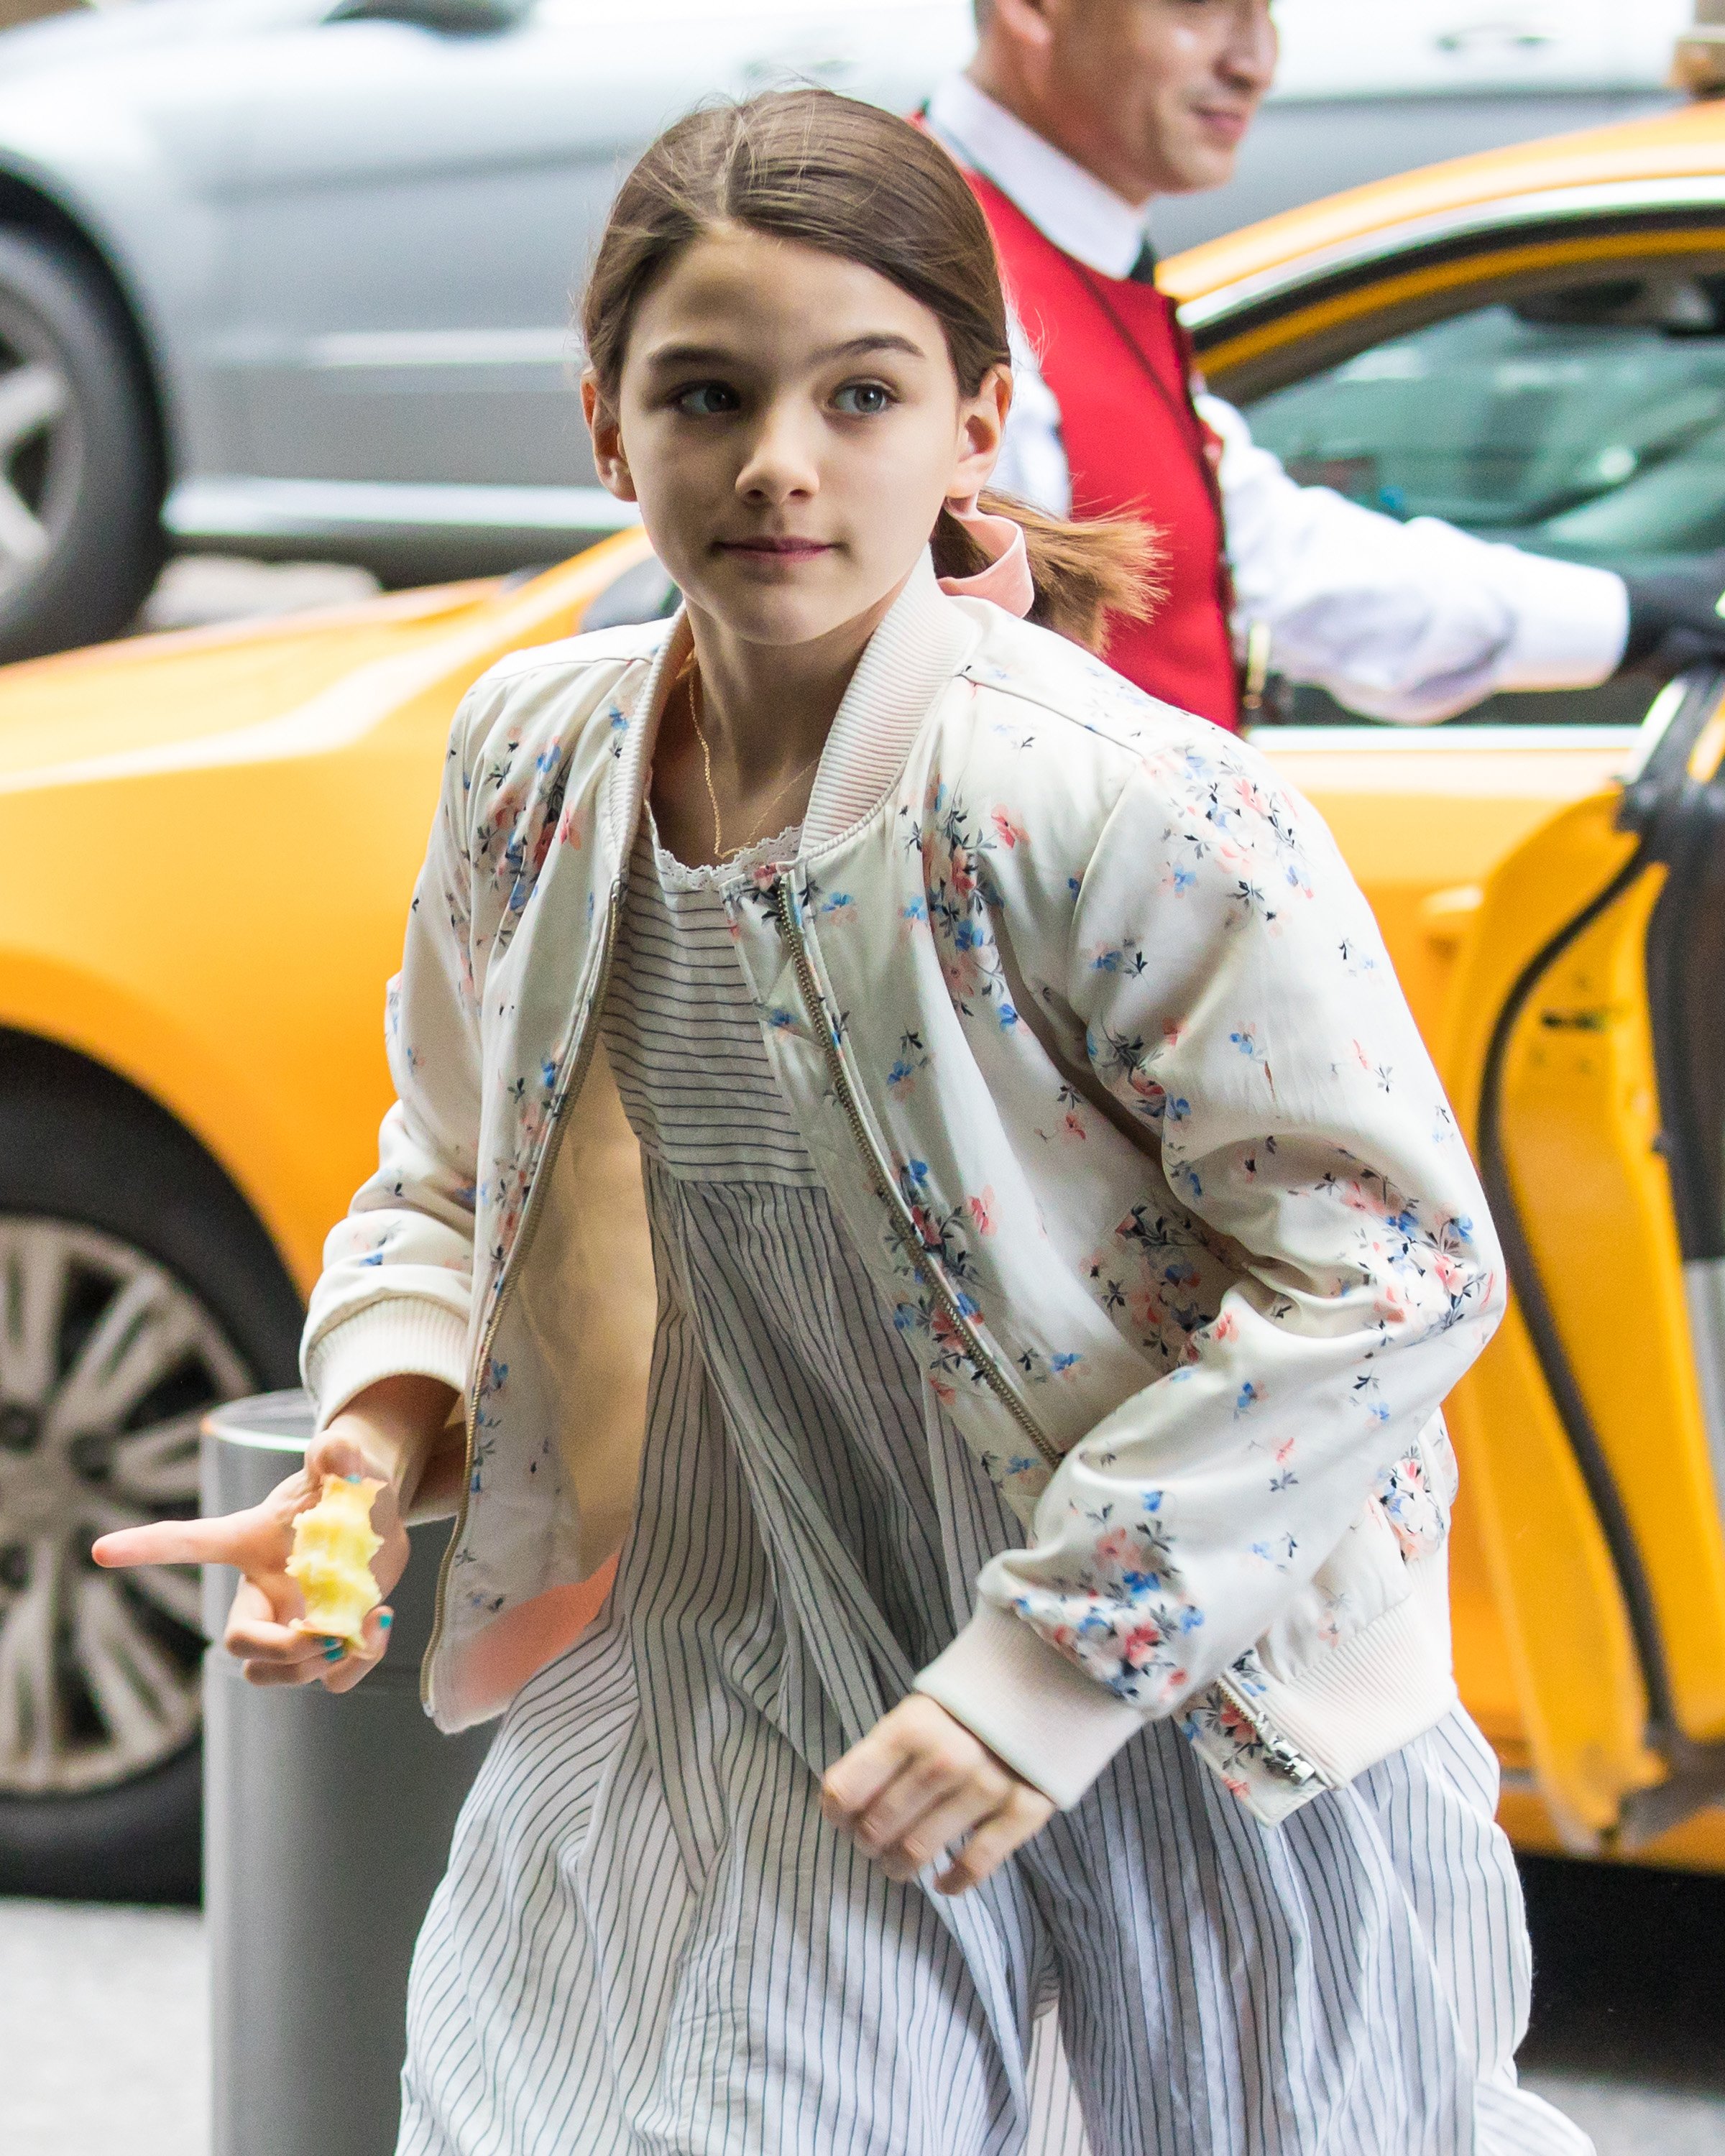 Suri Cruise is seen arriving at her hotel on April 28, 2018, in New York City | Source: Getty Images